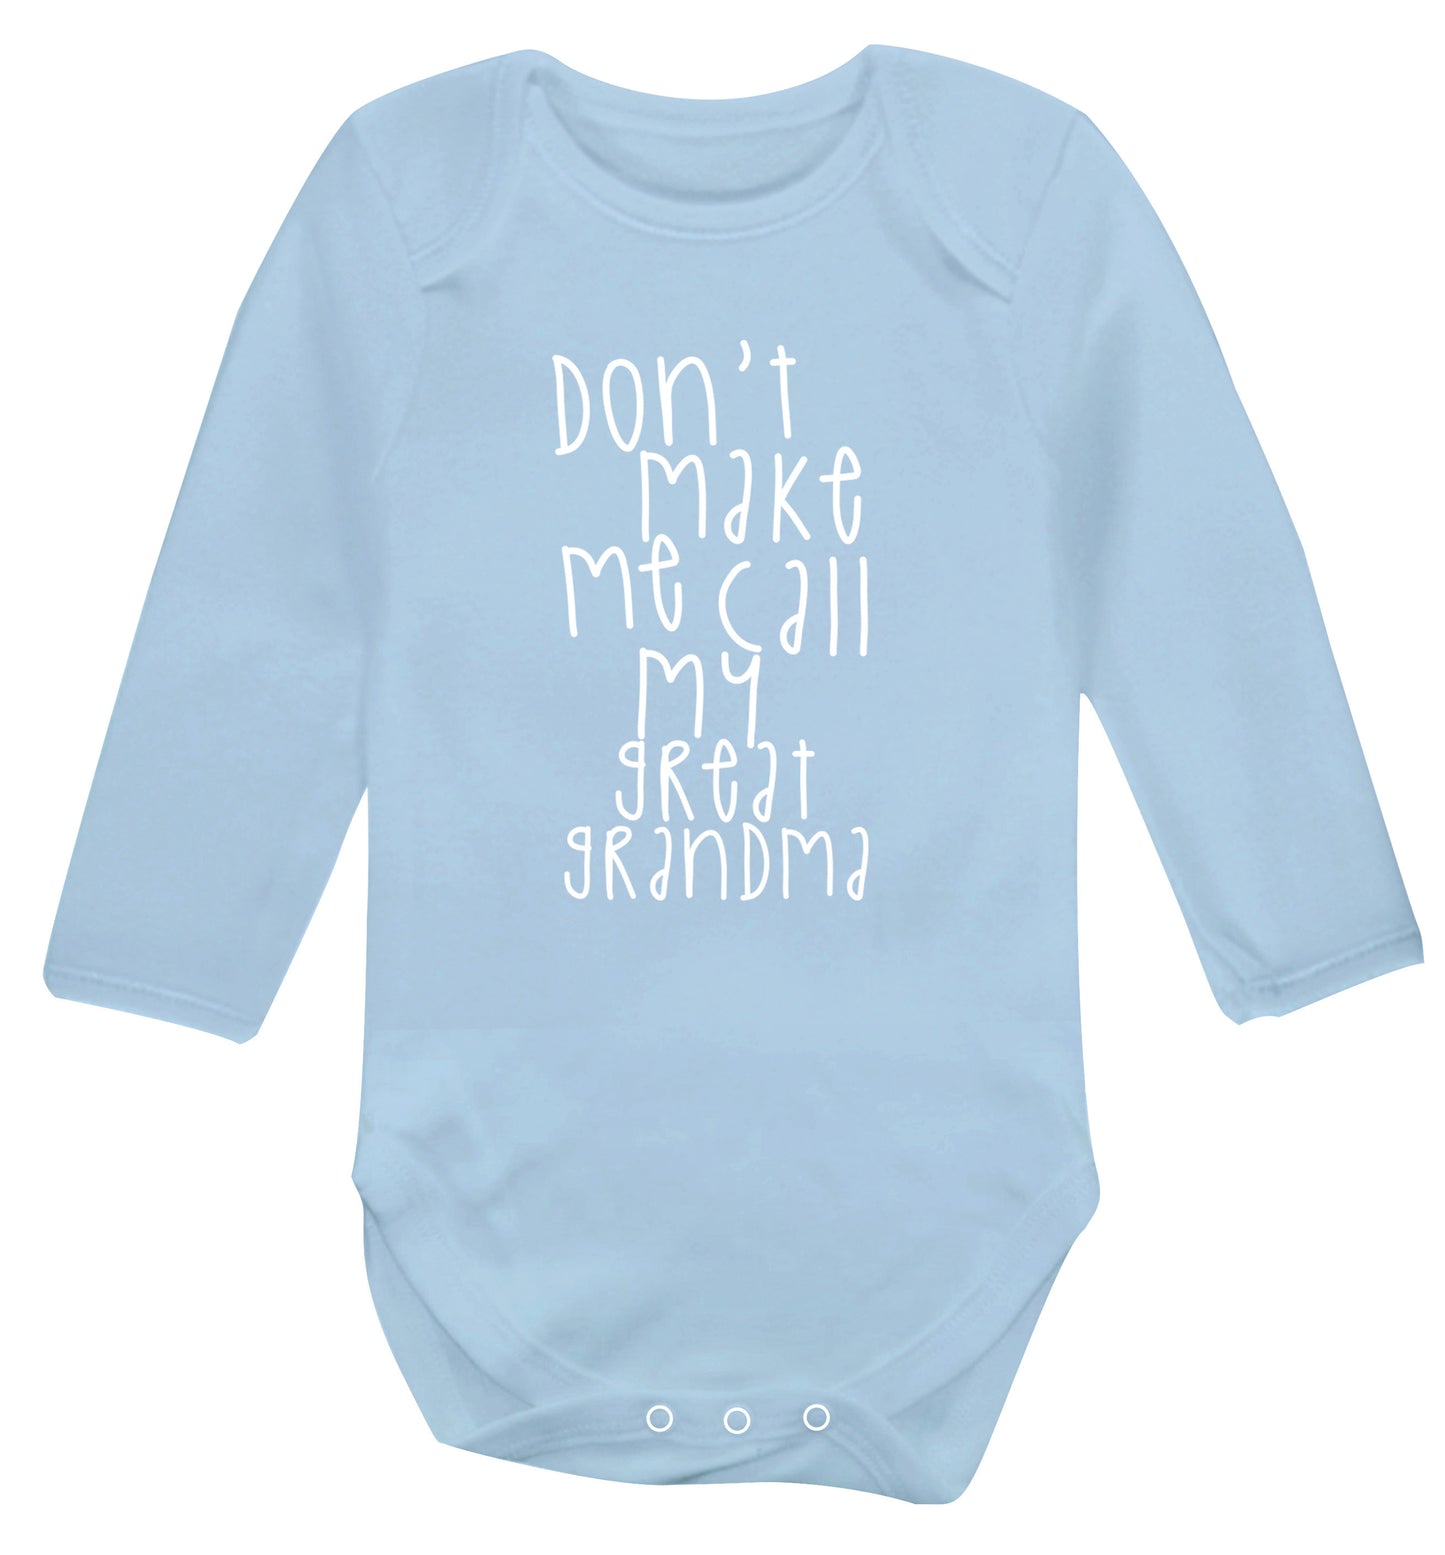 Don't make me call my great grandma Baby Vest long sleeved pale blue 6-12 months